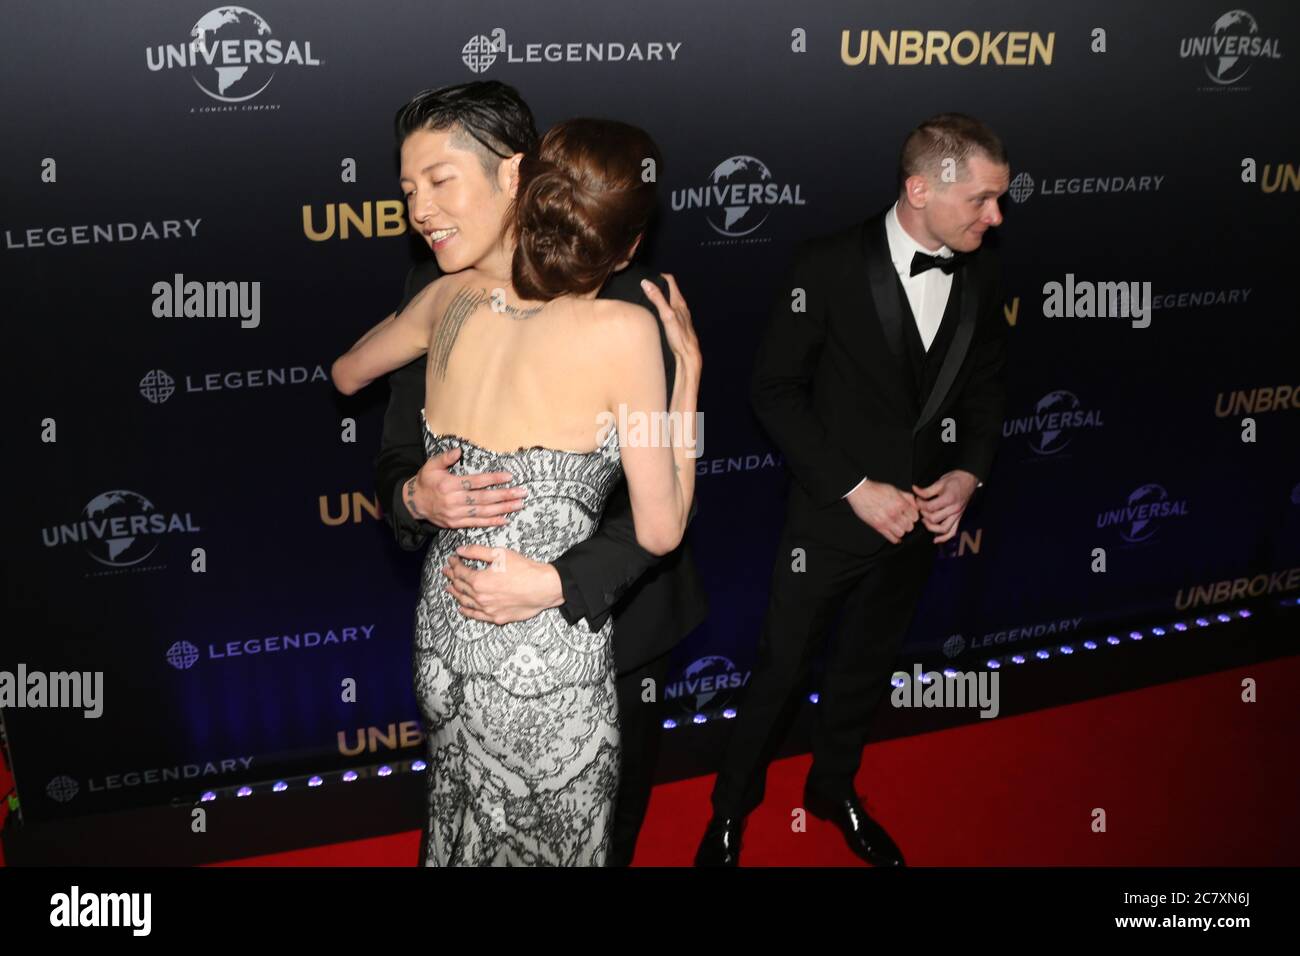 Unbroken producer and director Angelina Jolie with actors Miyavi and Jack O’Connell on the red carpet for the world premiere of ‘Unbroken’ at the Stat Stock Photo